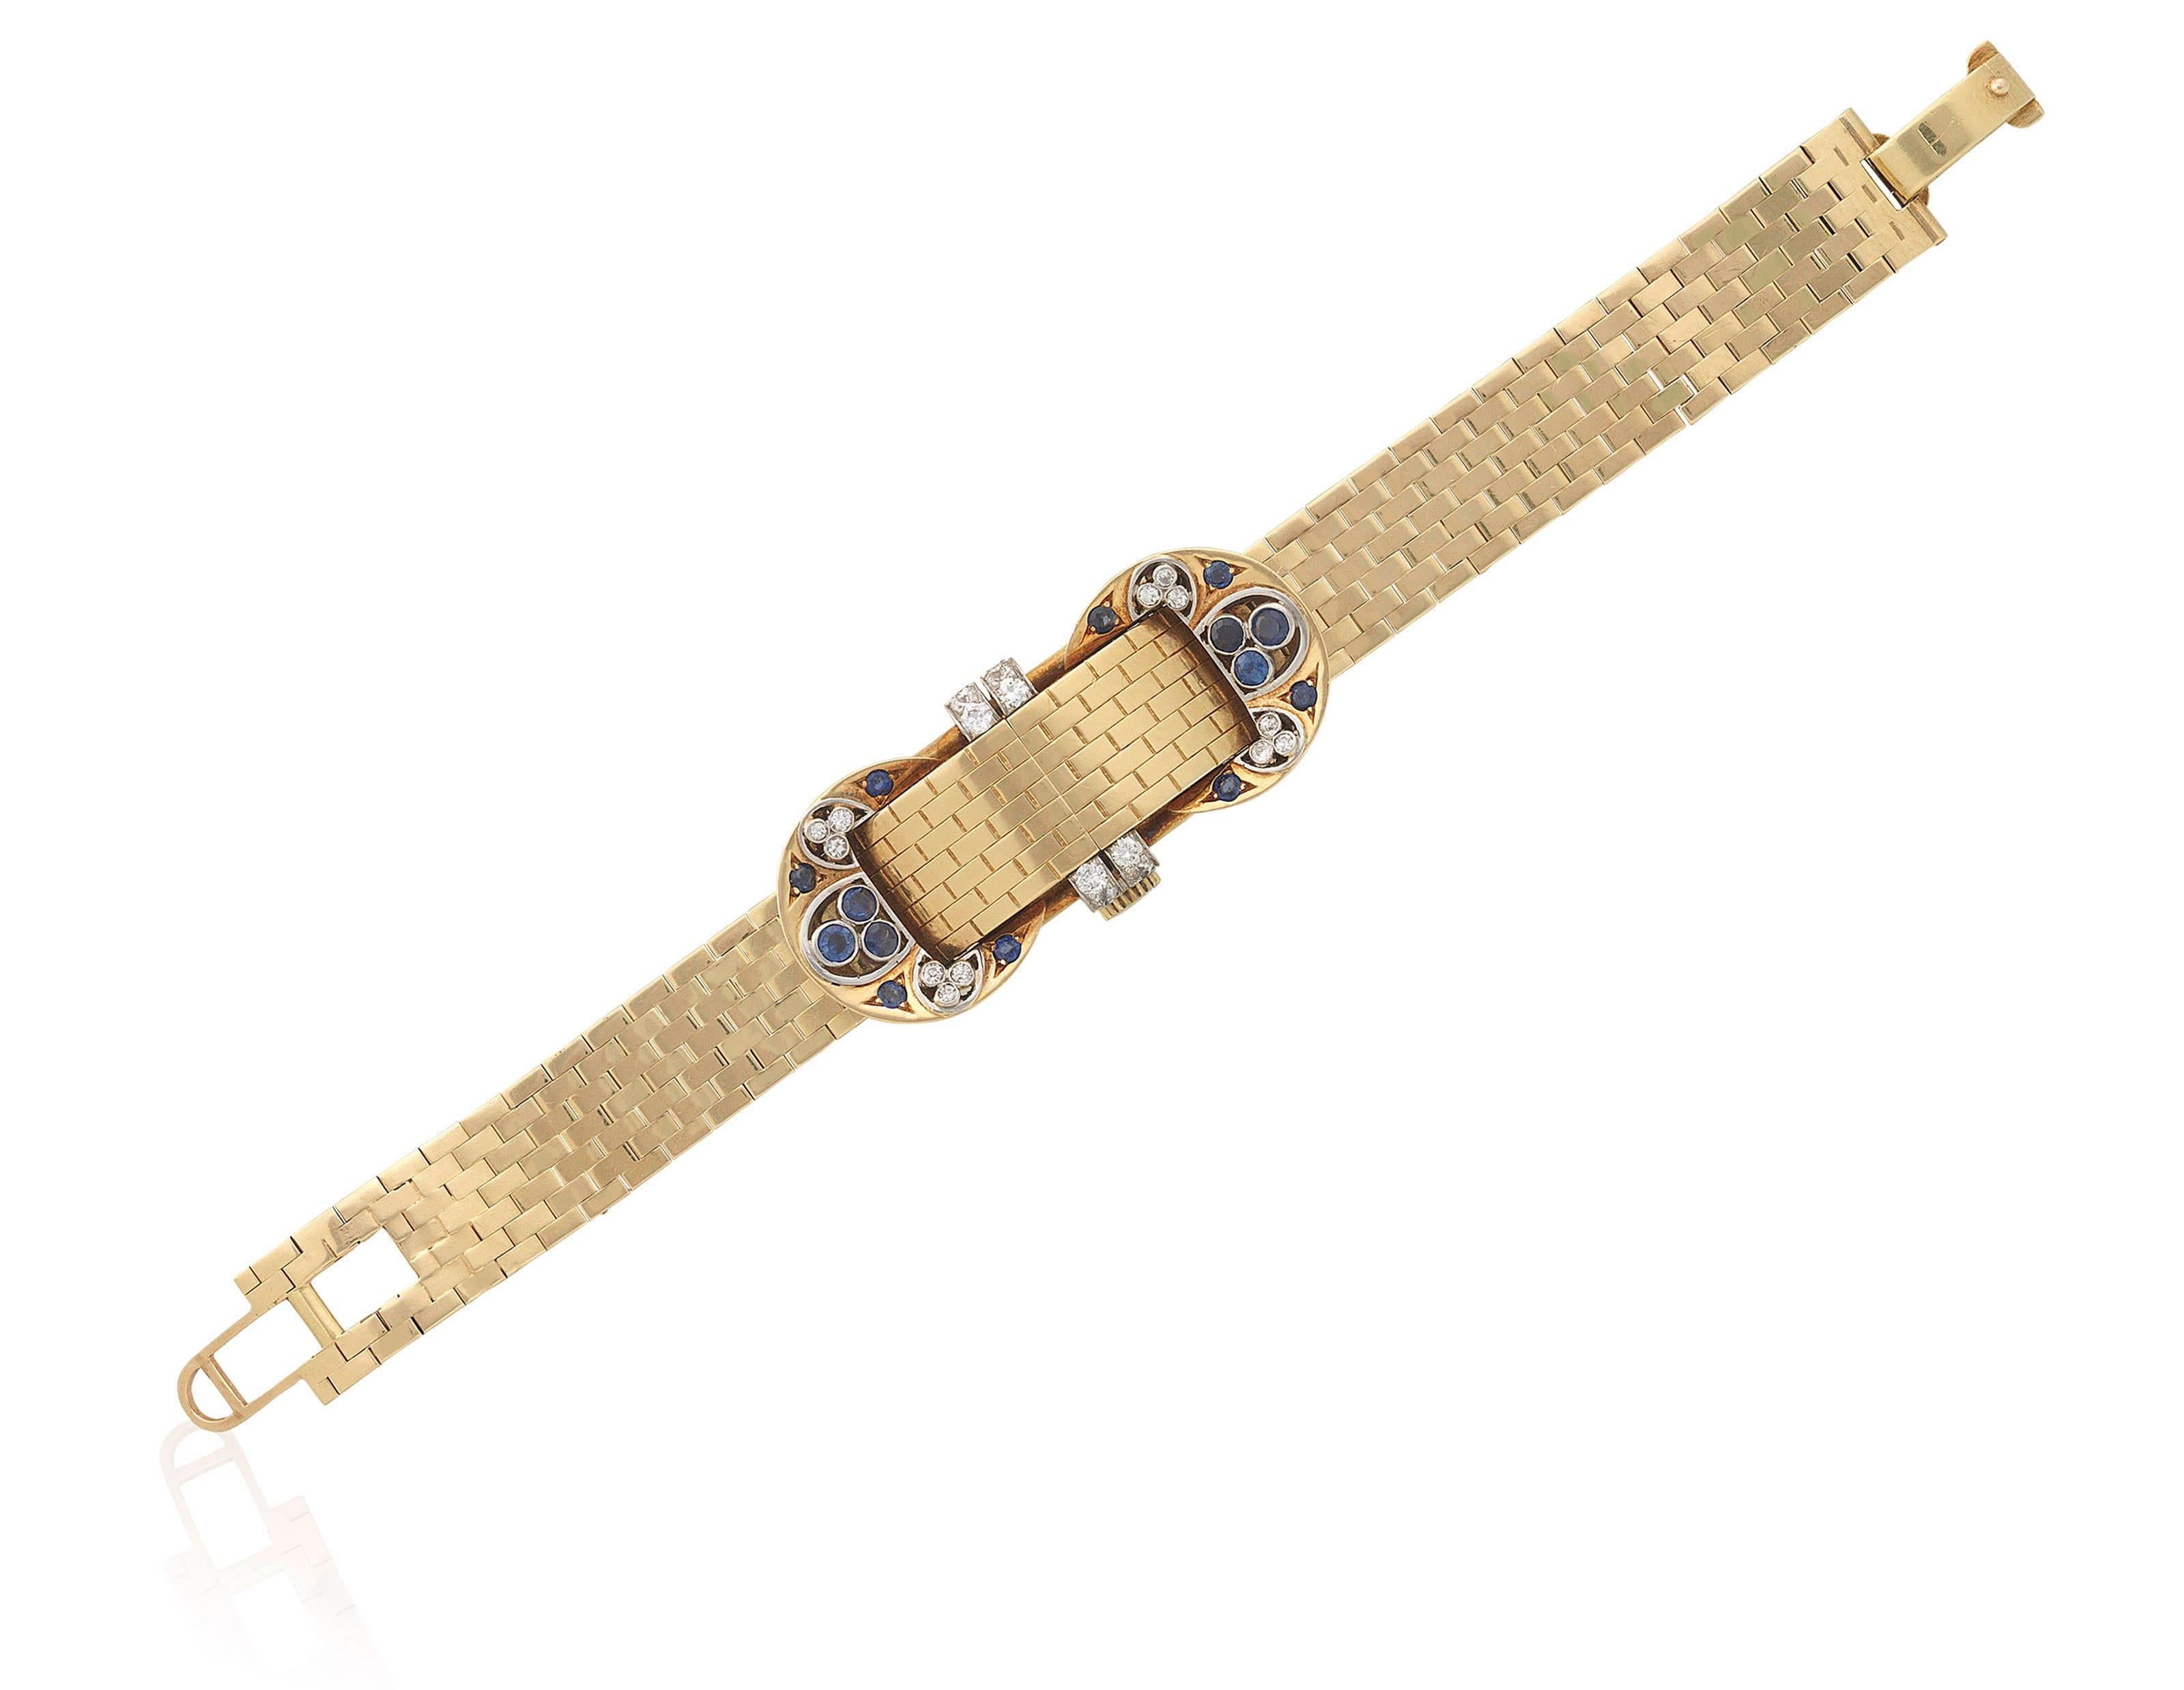 A chic retro mystery watch-bracelet by Van Cleef & Arpels in 18 karat yellow gold, embellished with round brilliant cut sapphires and old cut diamonds. The gold case opens to reveal a watch of manual movement. Made in New York, circa 1940.

Length